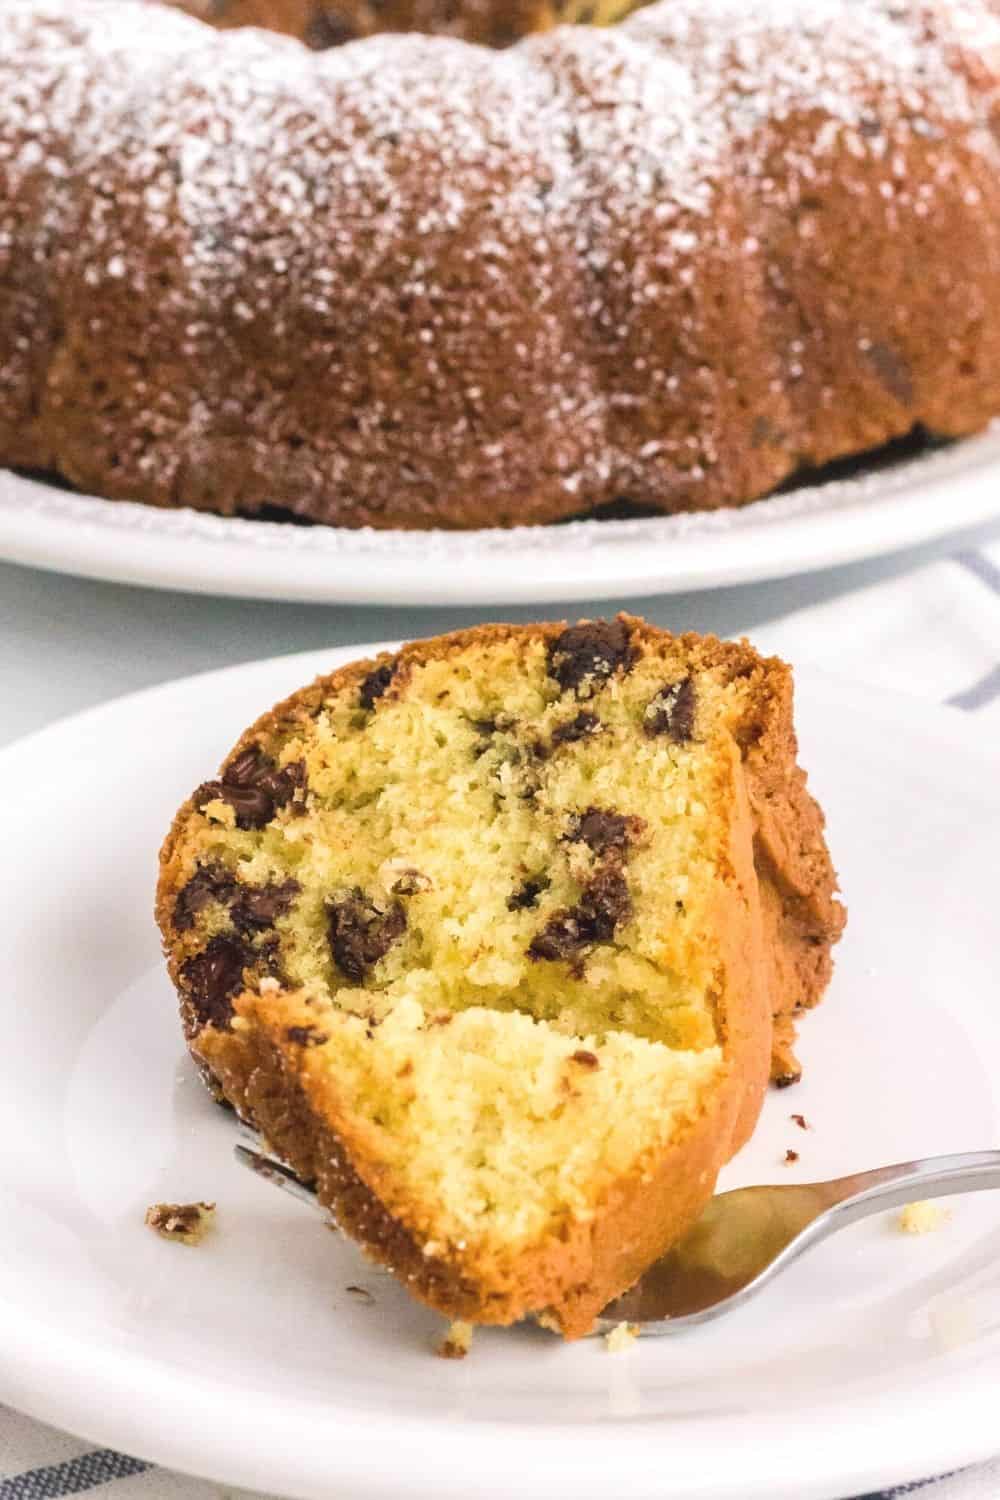 slice of chocolate chip cake on a white plate, with remainder of the bundt cake in the background. A fork has cut a bite out of the slice.